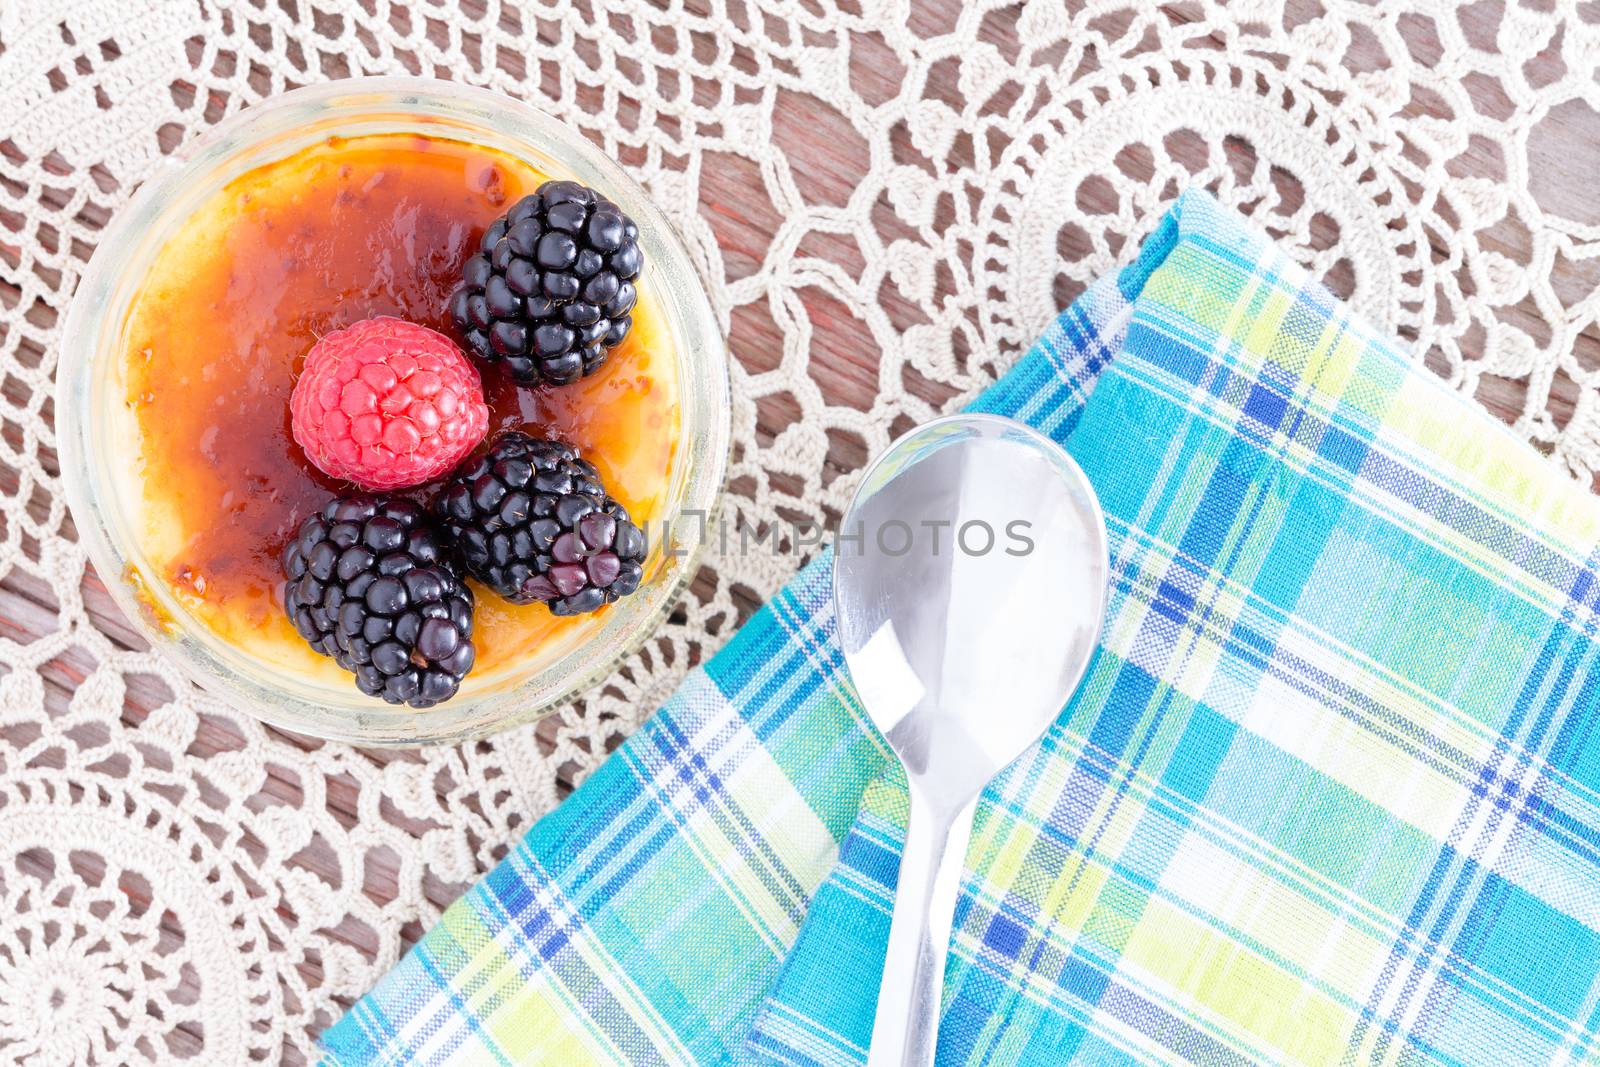 Delicious caramelized custard topped with red and black raspberries from point of view angle with spoon over doily and blue napkin